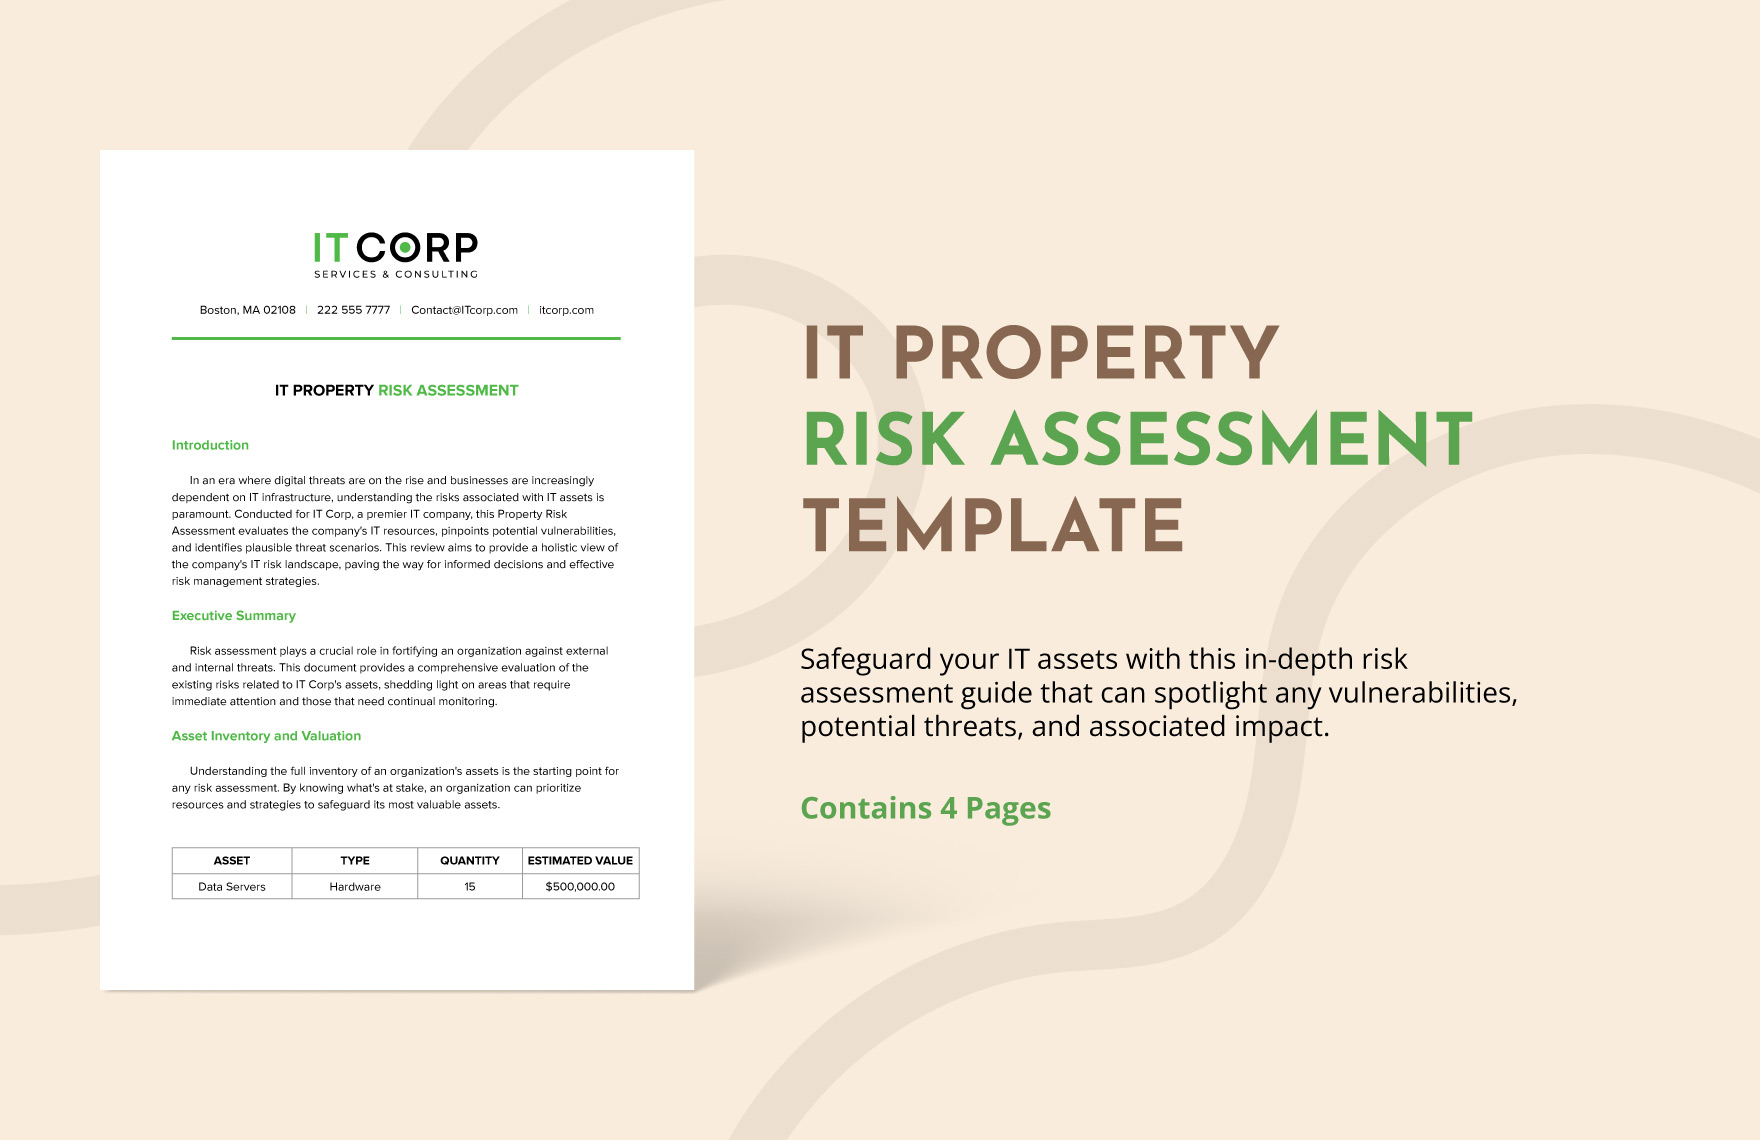 IT Property Risk Assessment Template